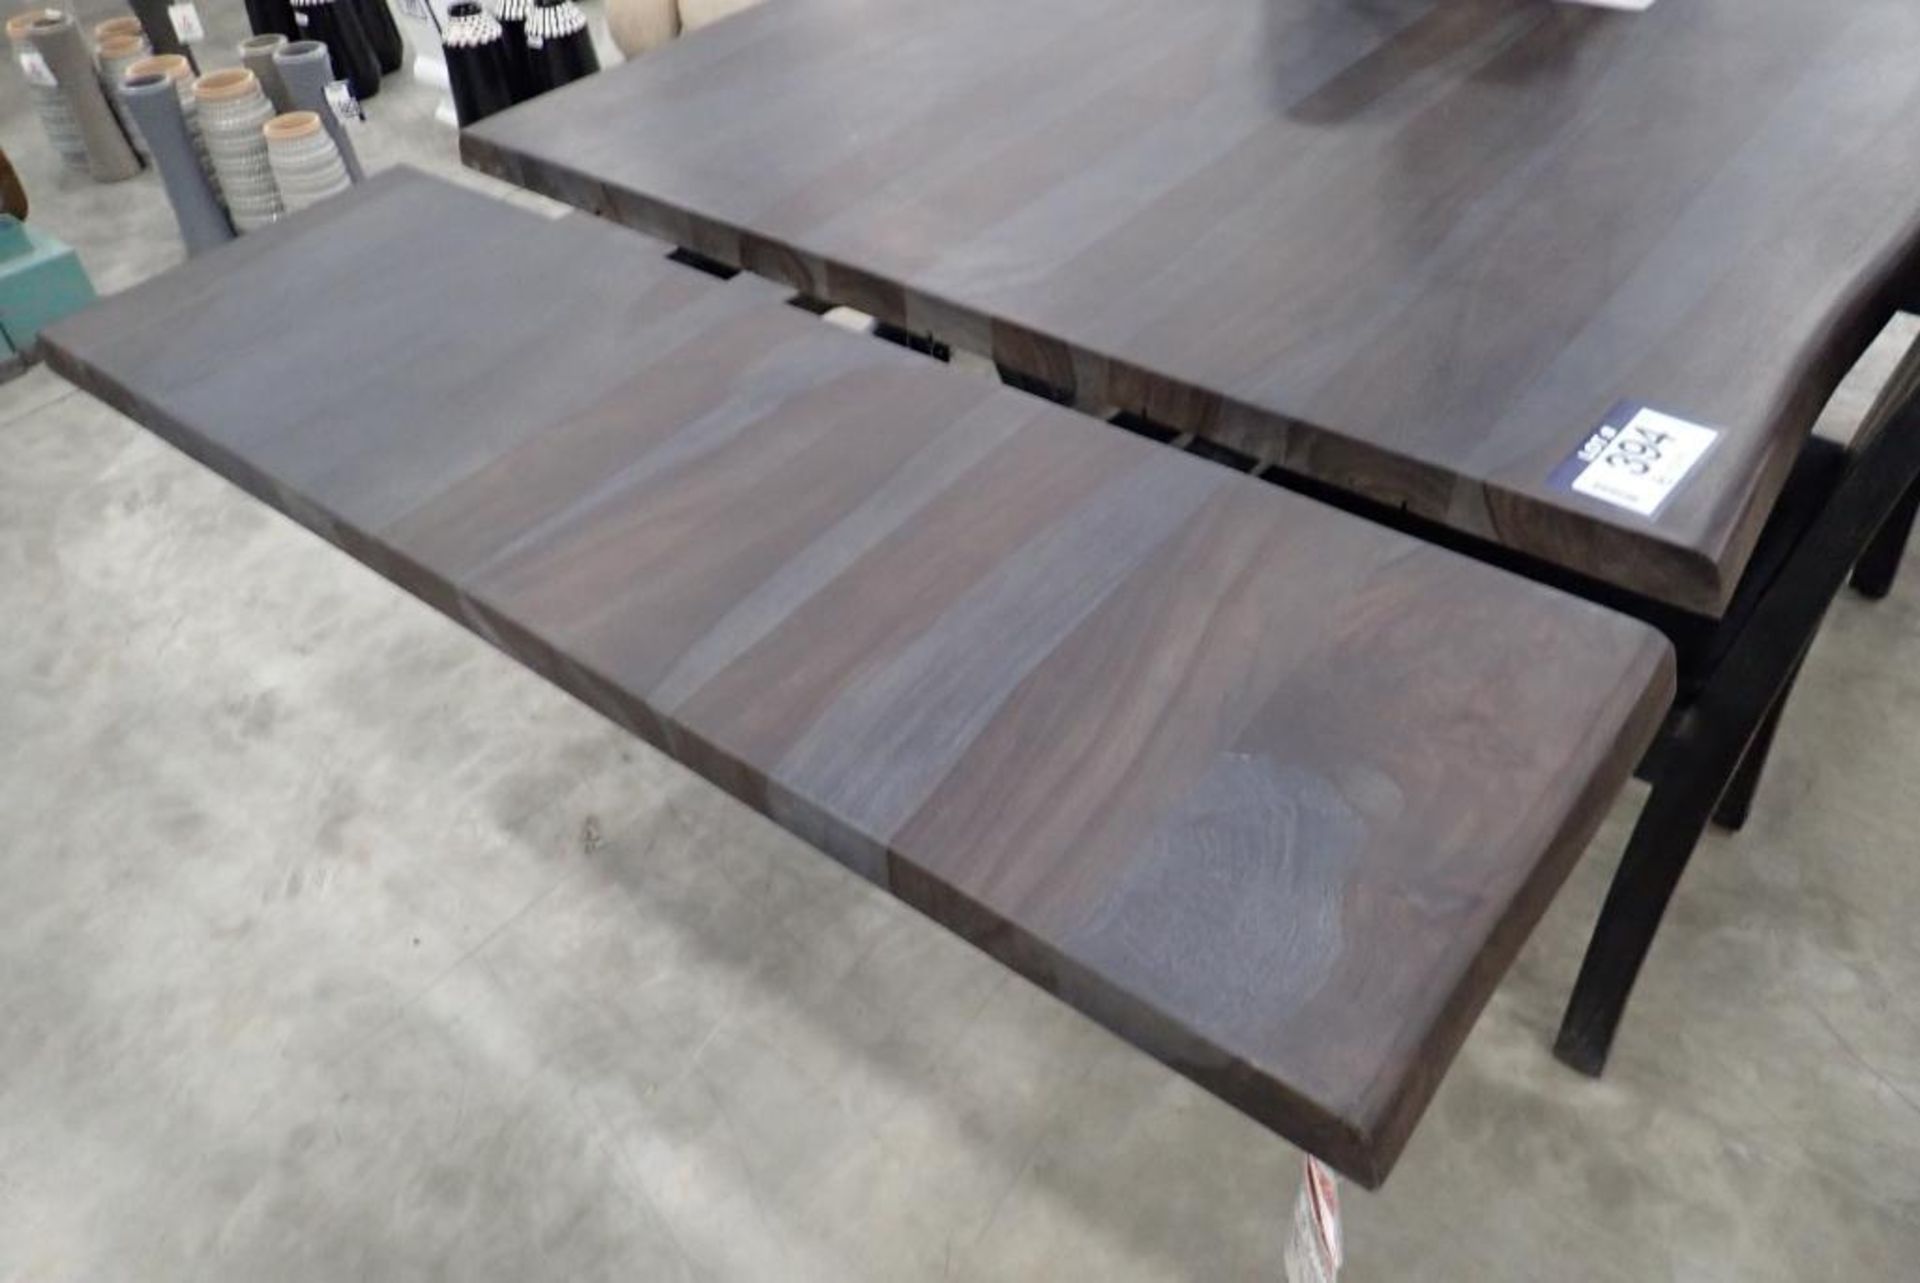 Wood Top 72"x39" Dining Table w/ (2) 12" Pull-Out Leaves, 2 Dining Chairs and 70" Bench. - Image 4 of 5